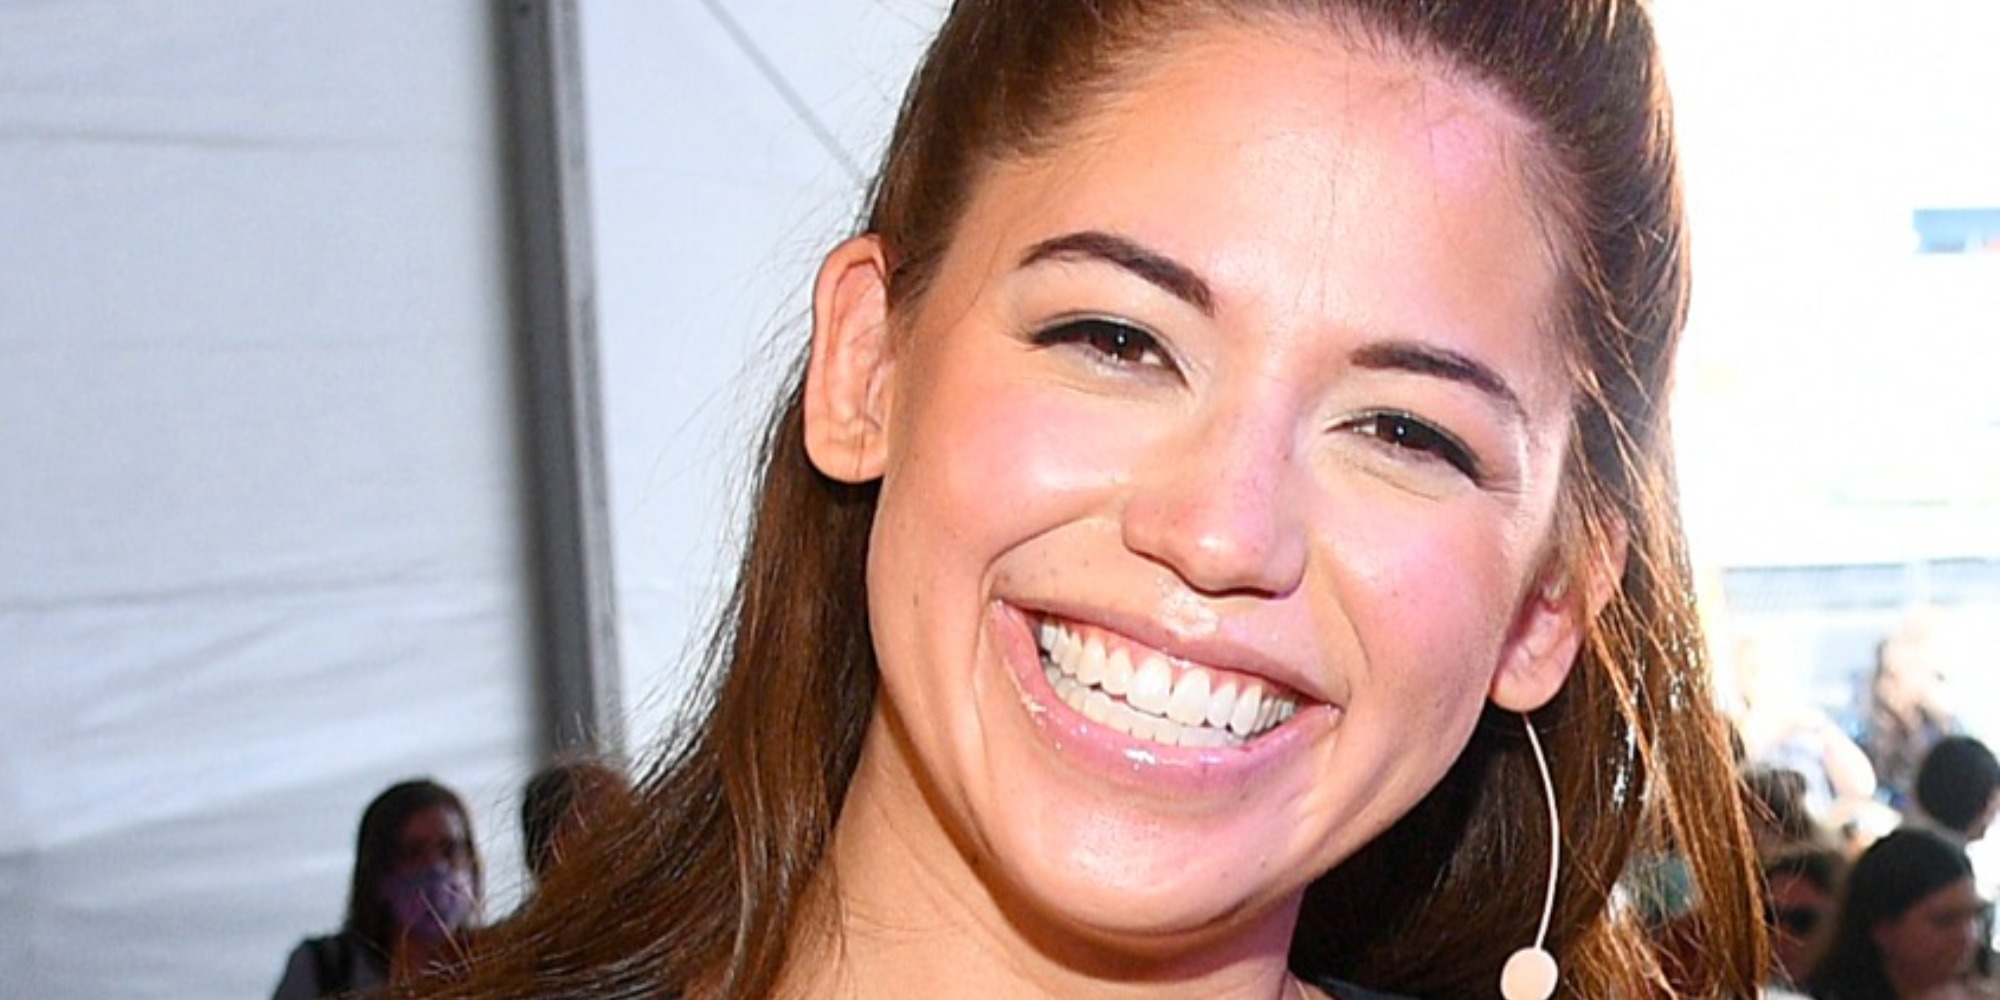 Molly Yeh smiles in a photograph, she stars in Food Network's "Girl Meets Farm."